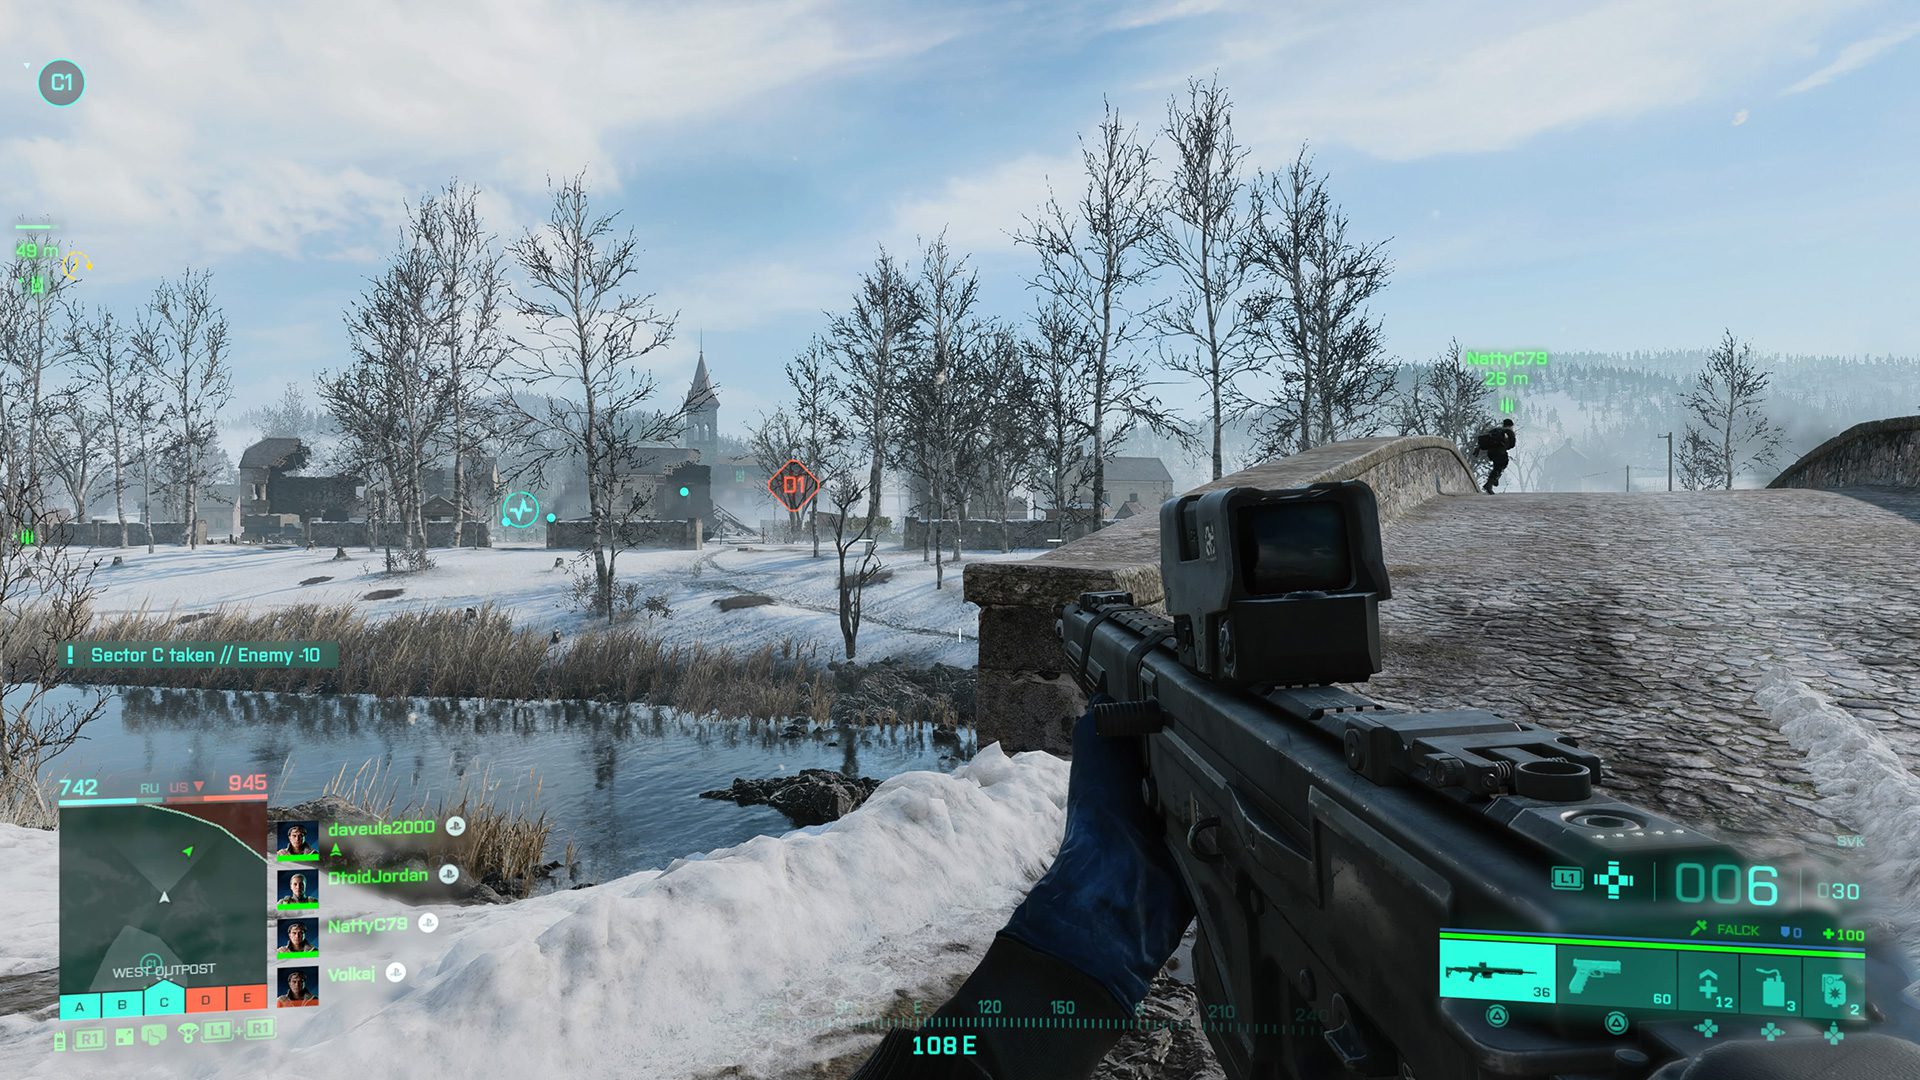 Revisiting the Battle of the Bulge with modern weaponry in Portal mode